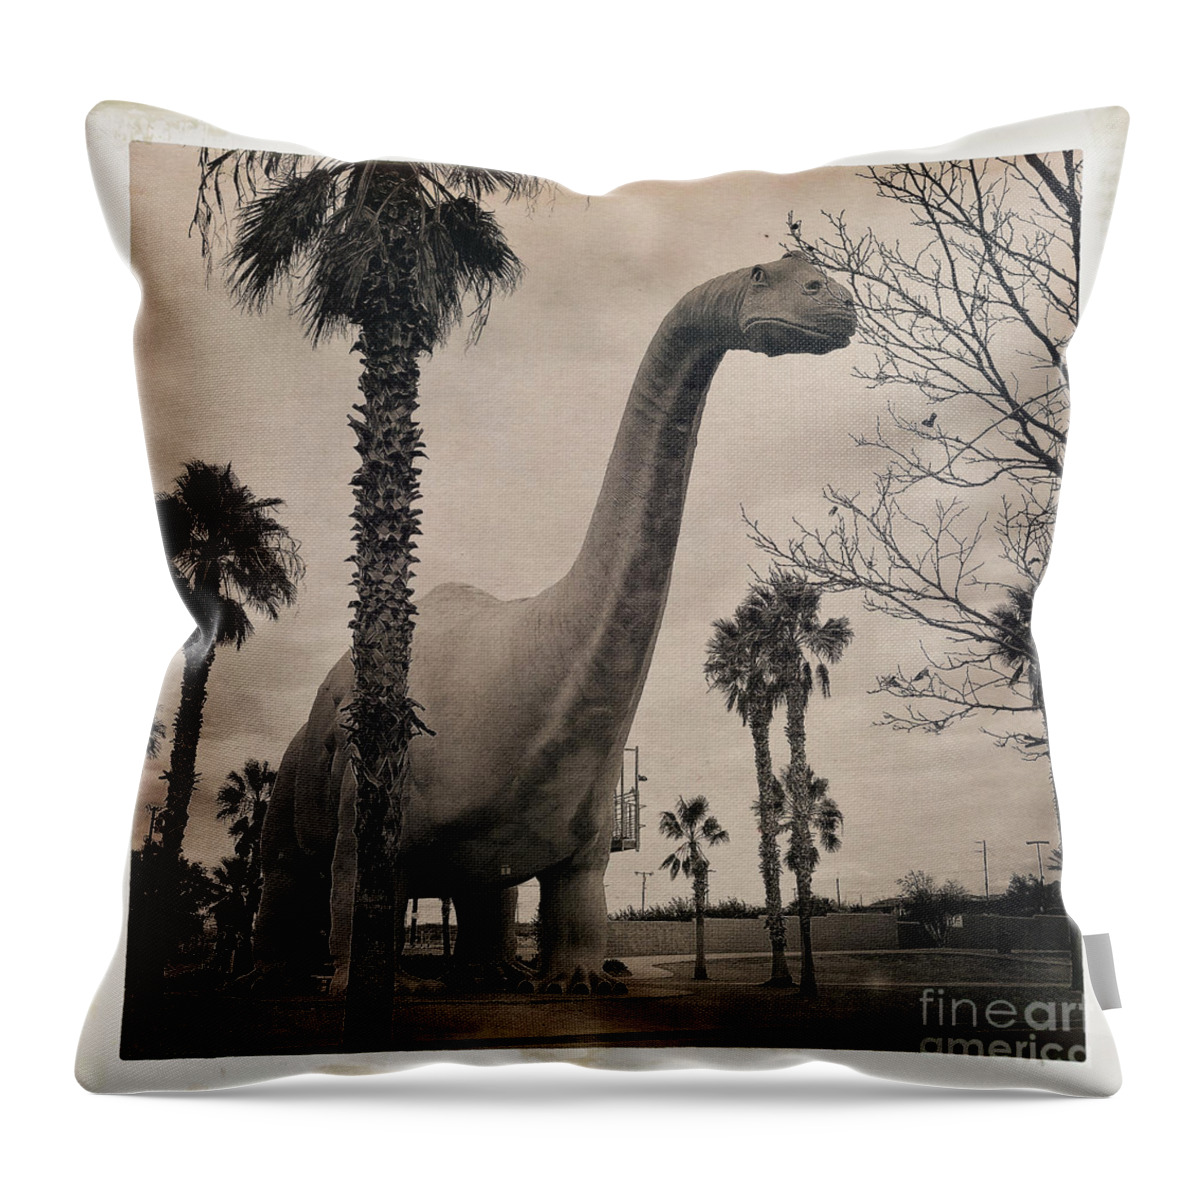 Vintage Throw Pillow featuring the photograph Vintage Dinosaur by Nina Prommer